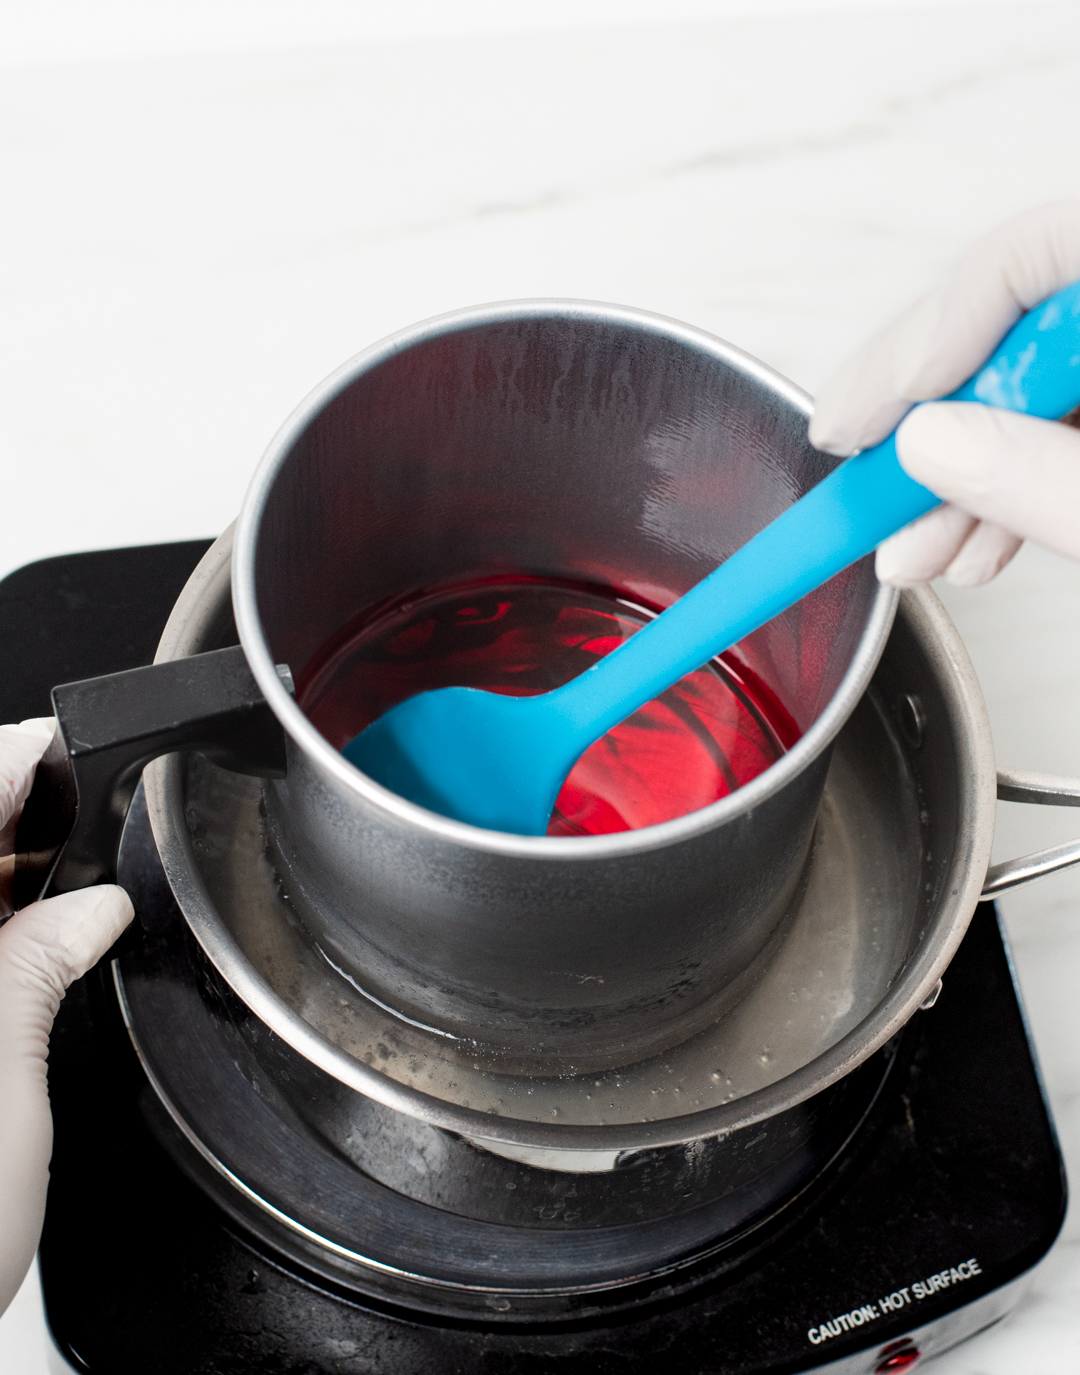 Stirring dye block into melted wax.